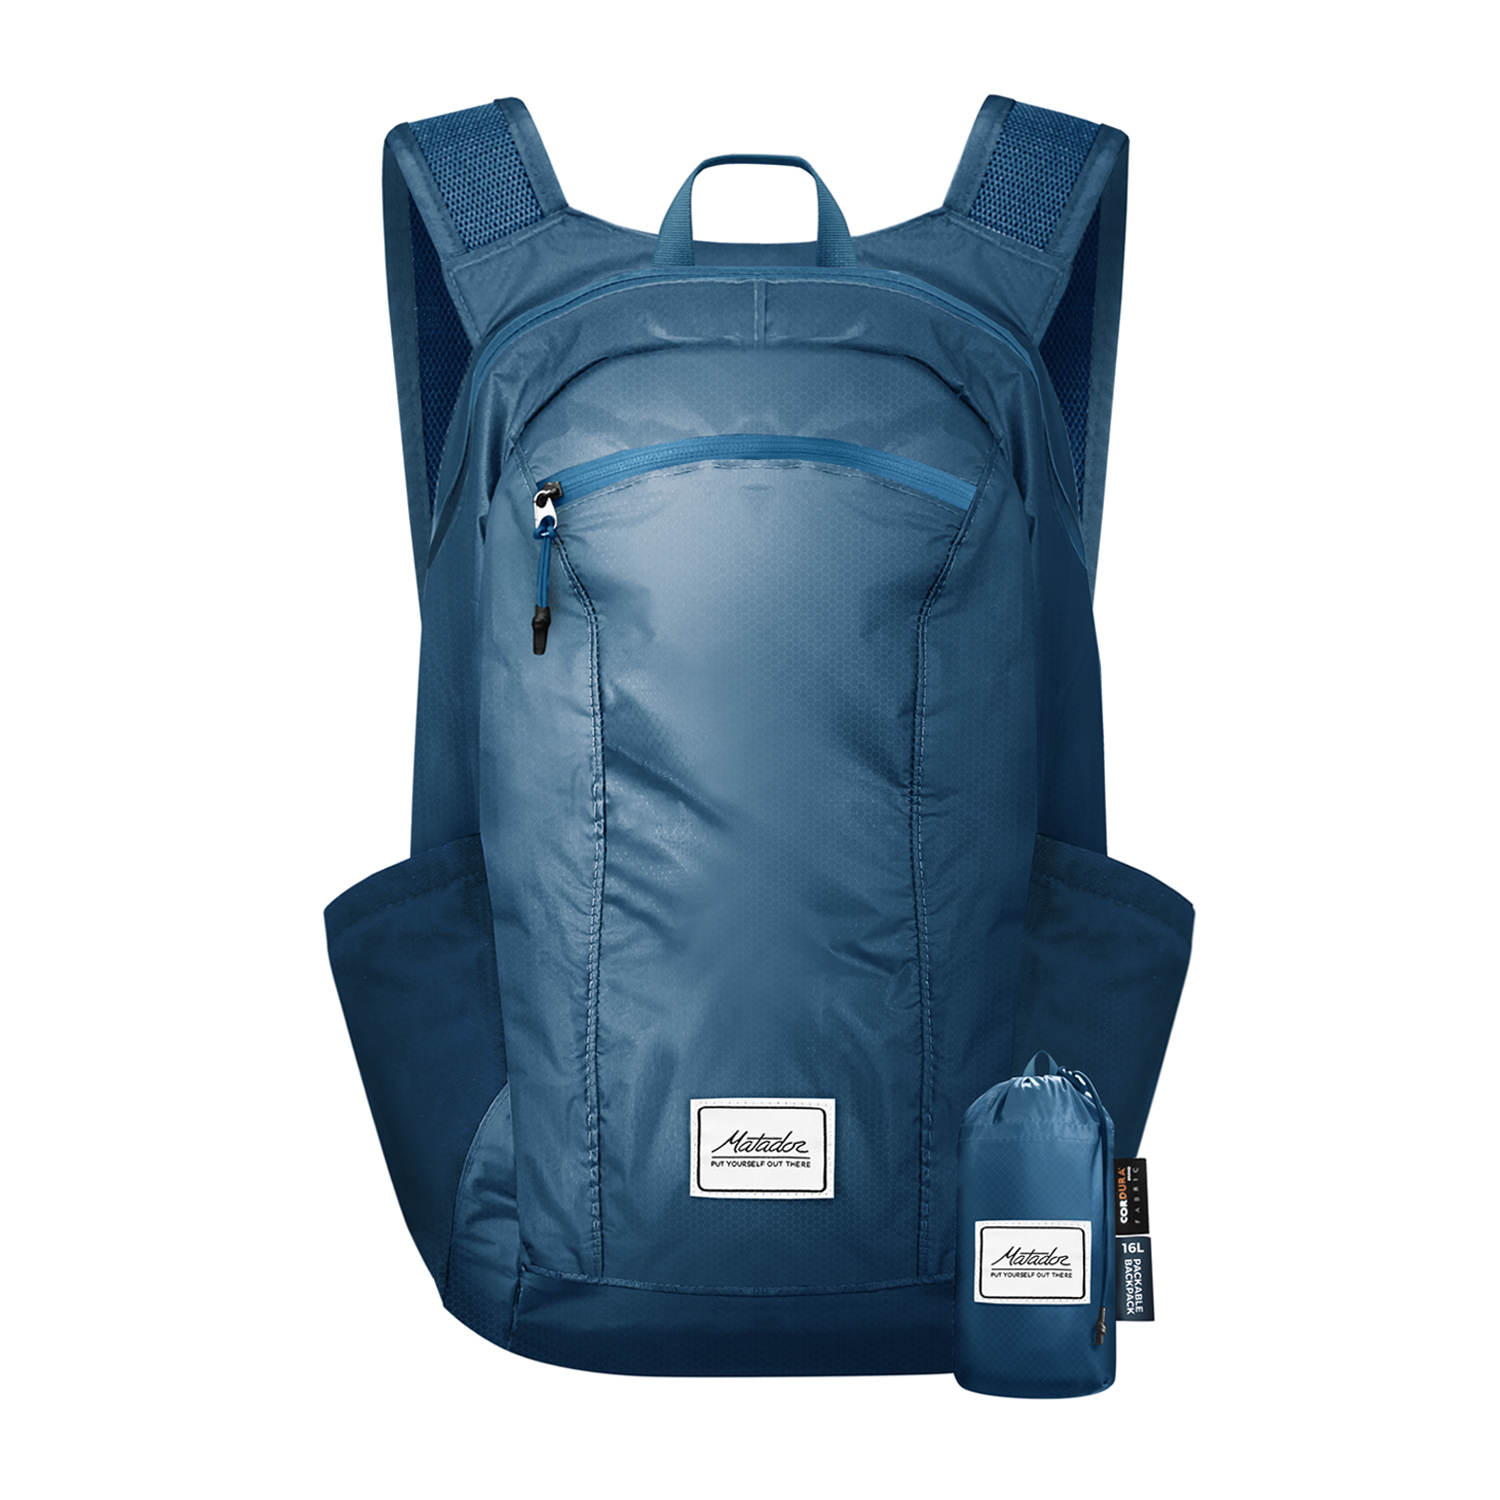 Daylite Packable Backpack - 16L